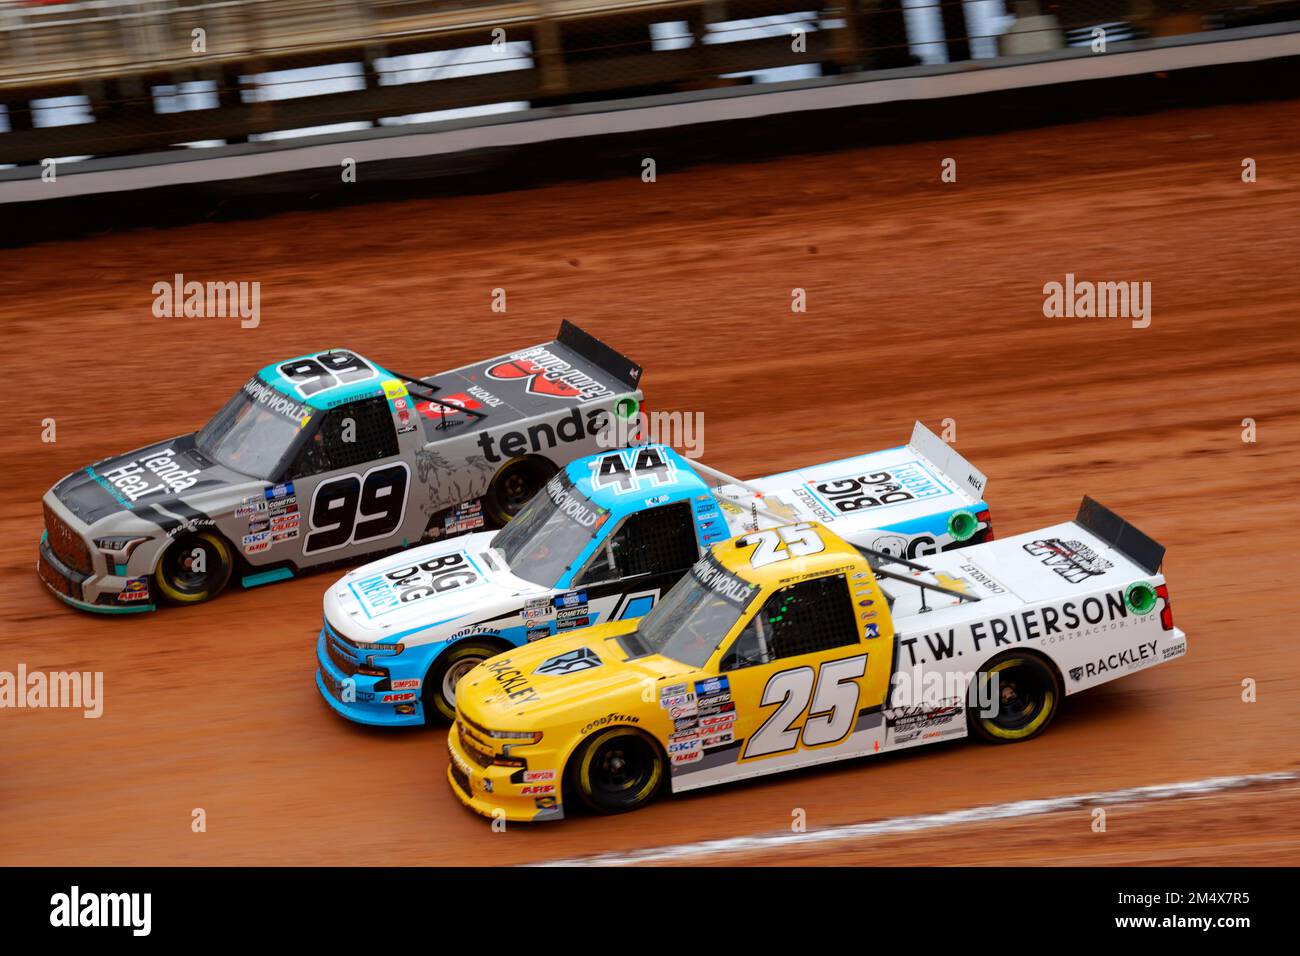 Bristol, TN, USA. 16th Apr, 2022. Niece Motorsports takes to the track to qualify for the Pinty's Truck Race on Dirt at Bristol Motor Speedway in Bristol, TN. Credit: csm/Alamy Live News Stock Photo